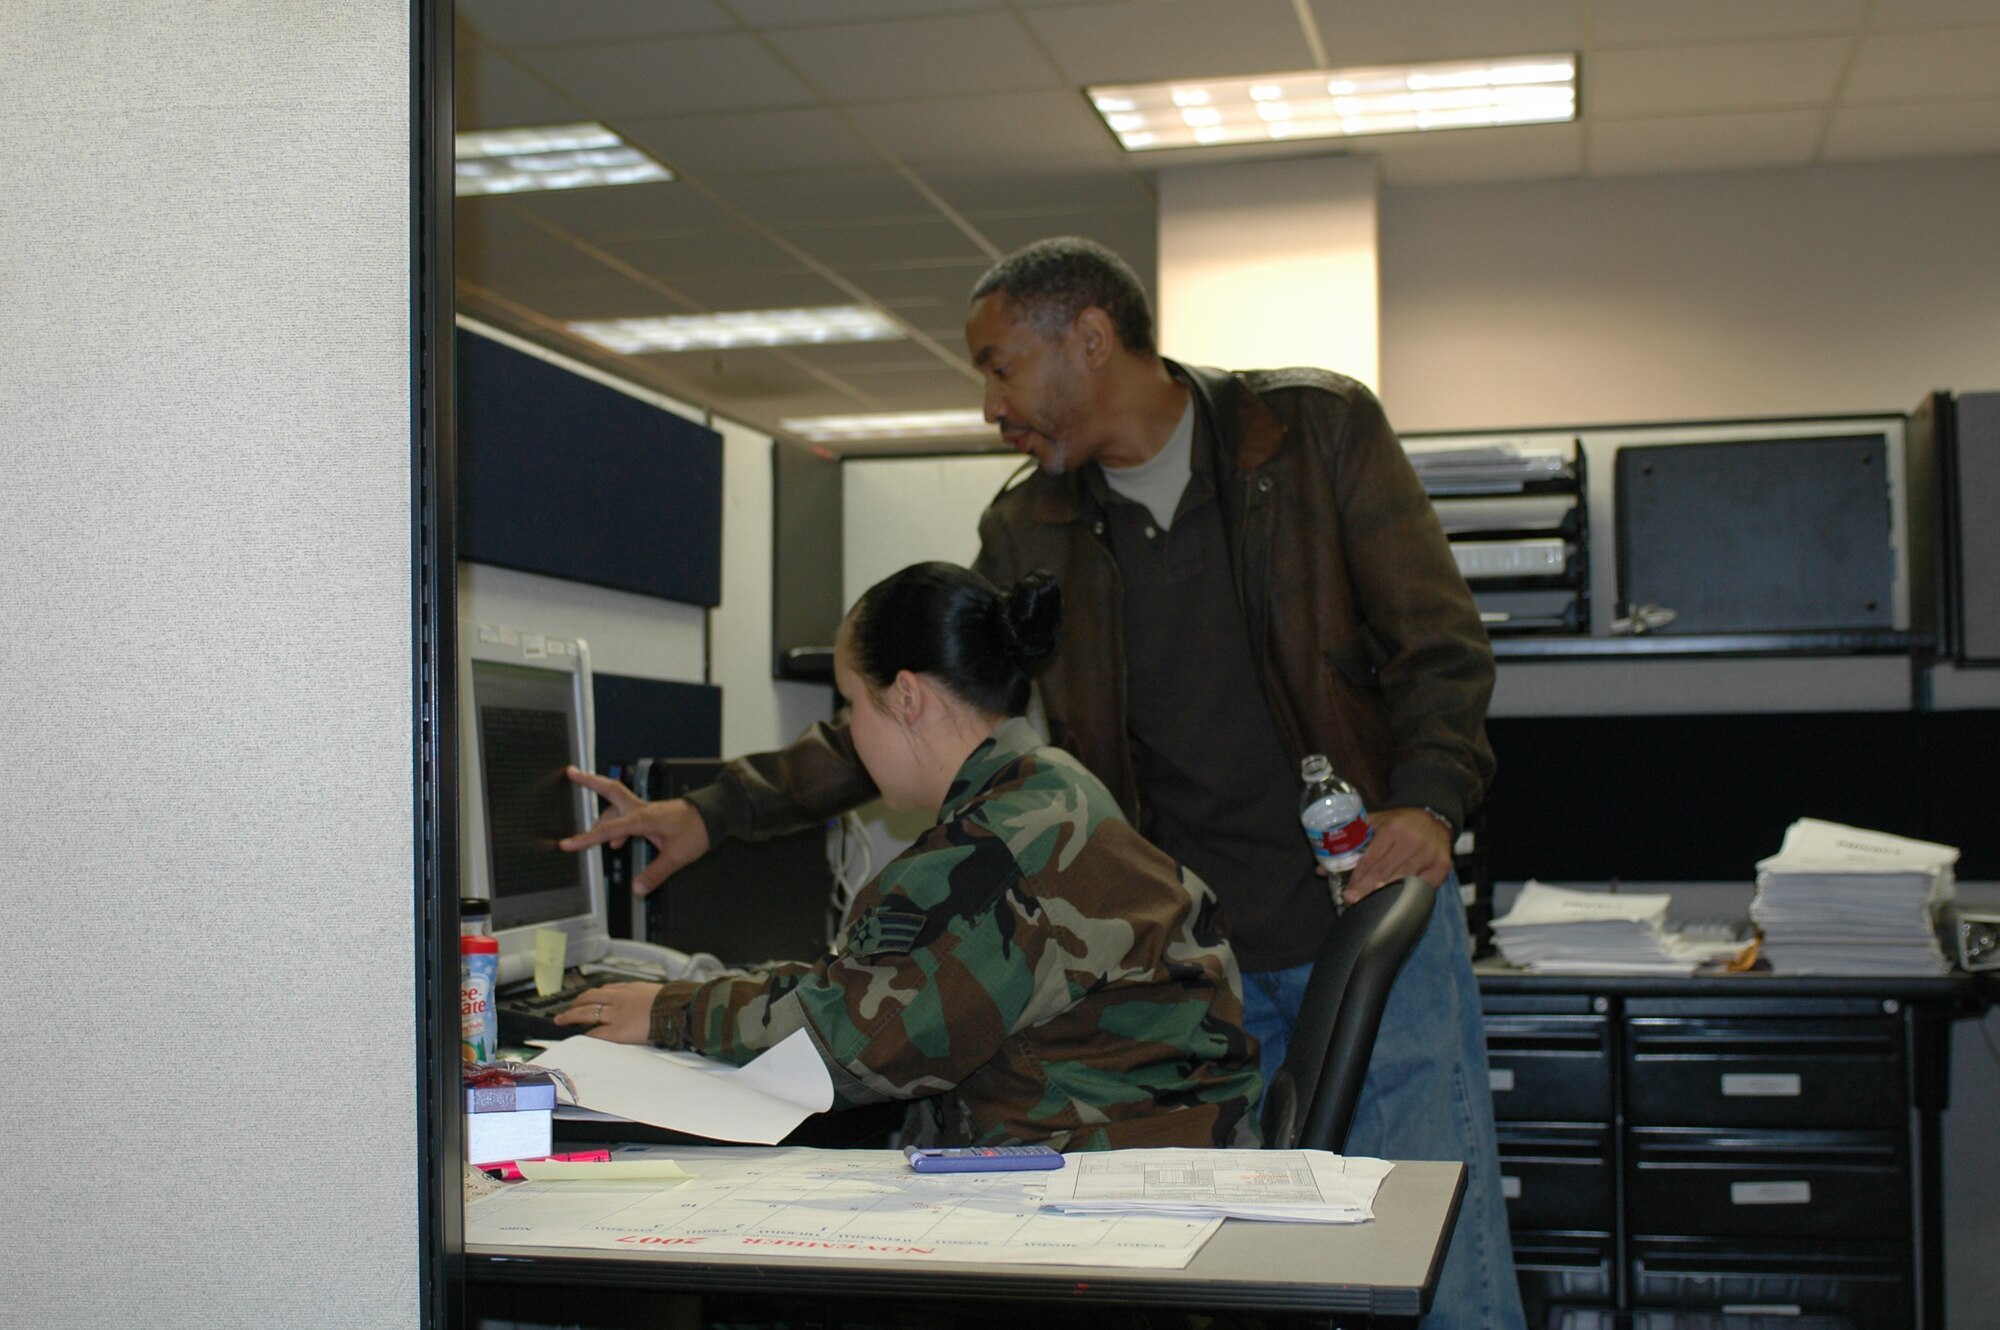 Darryl Thomas instructs Senior Airman Pamela Coats on an aspect of military pay processing. Civilians play a key role in the squadron’s ability to handle a heavy workload, as well as providing institutional knowledge about what has and has not worked in the past. (U.S Air Force photo/Nick DeCicco)